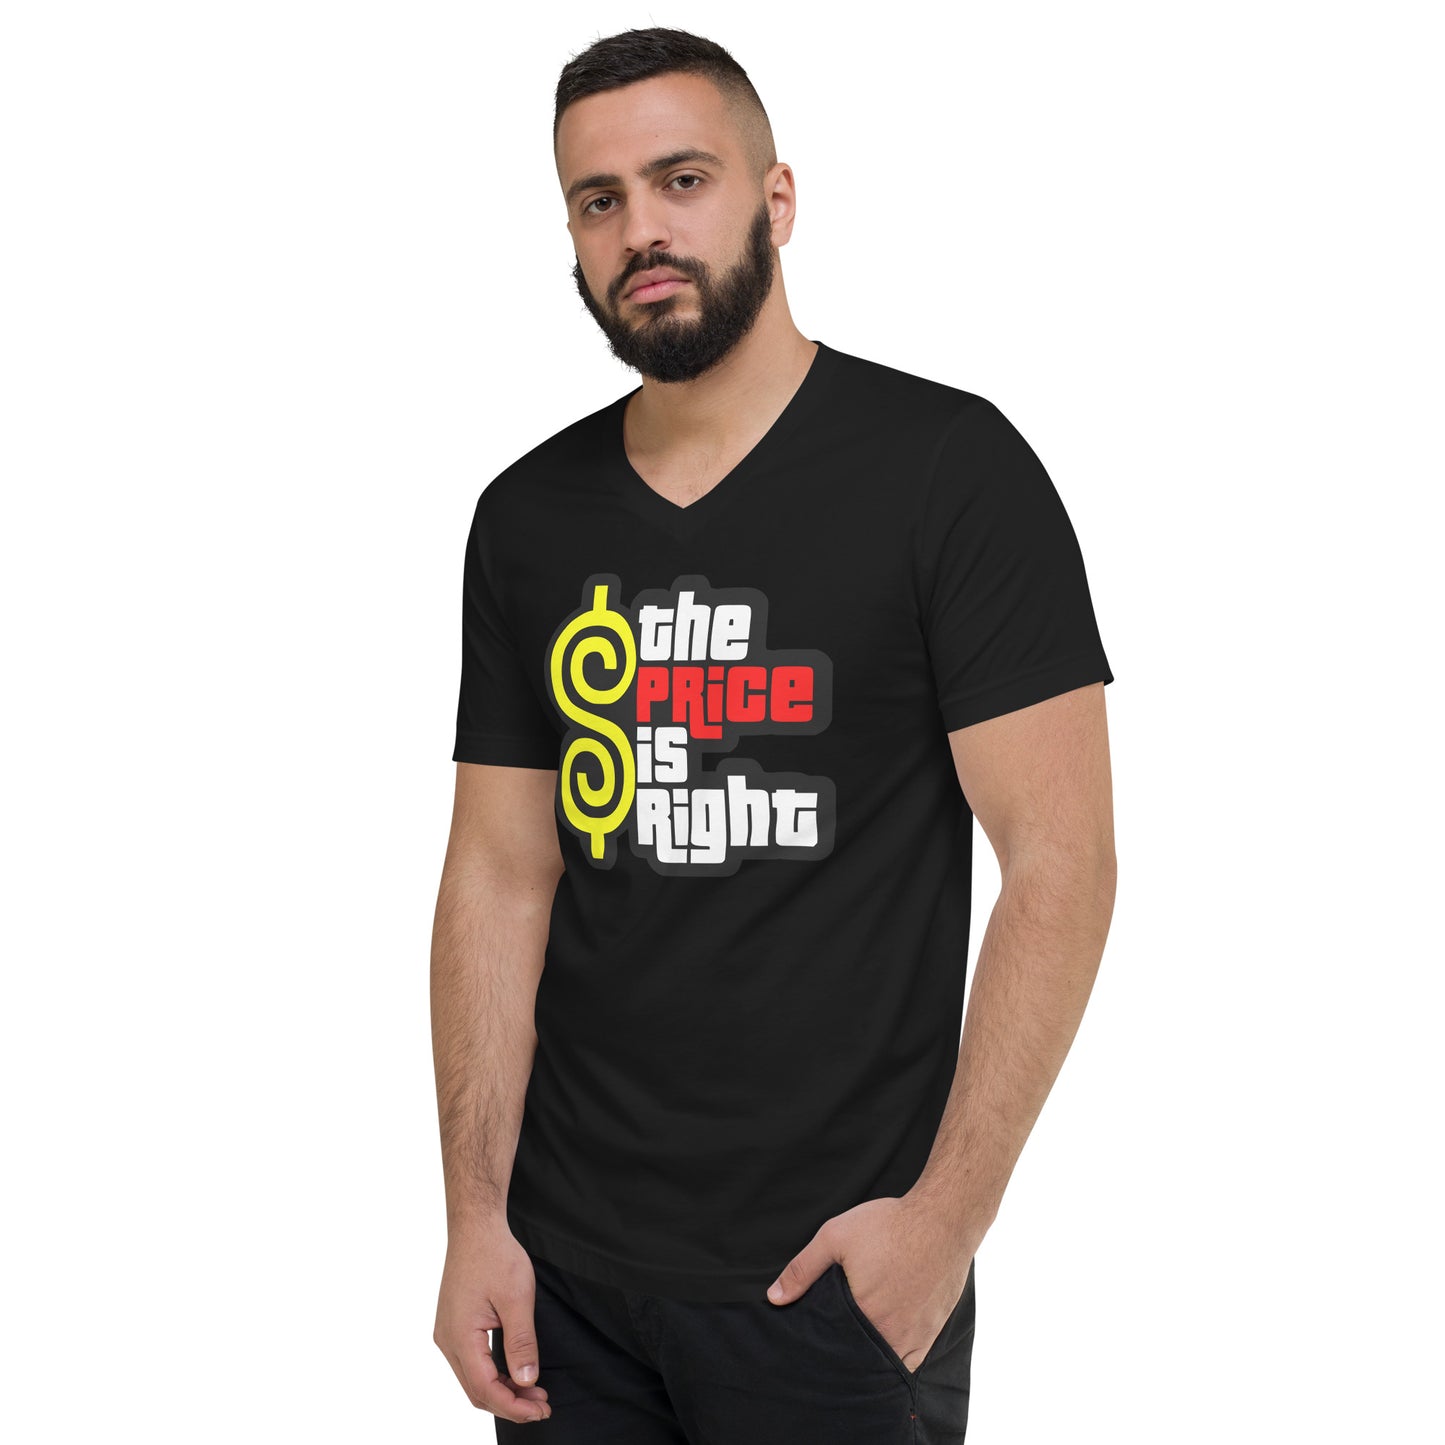 Unisex Short Sleeve V-Neck T-Shirt - The Price is Right T-Shirt